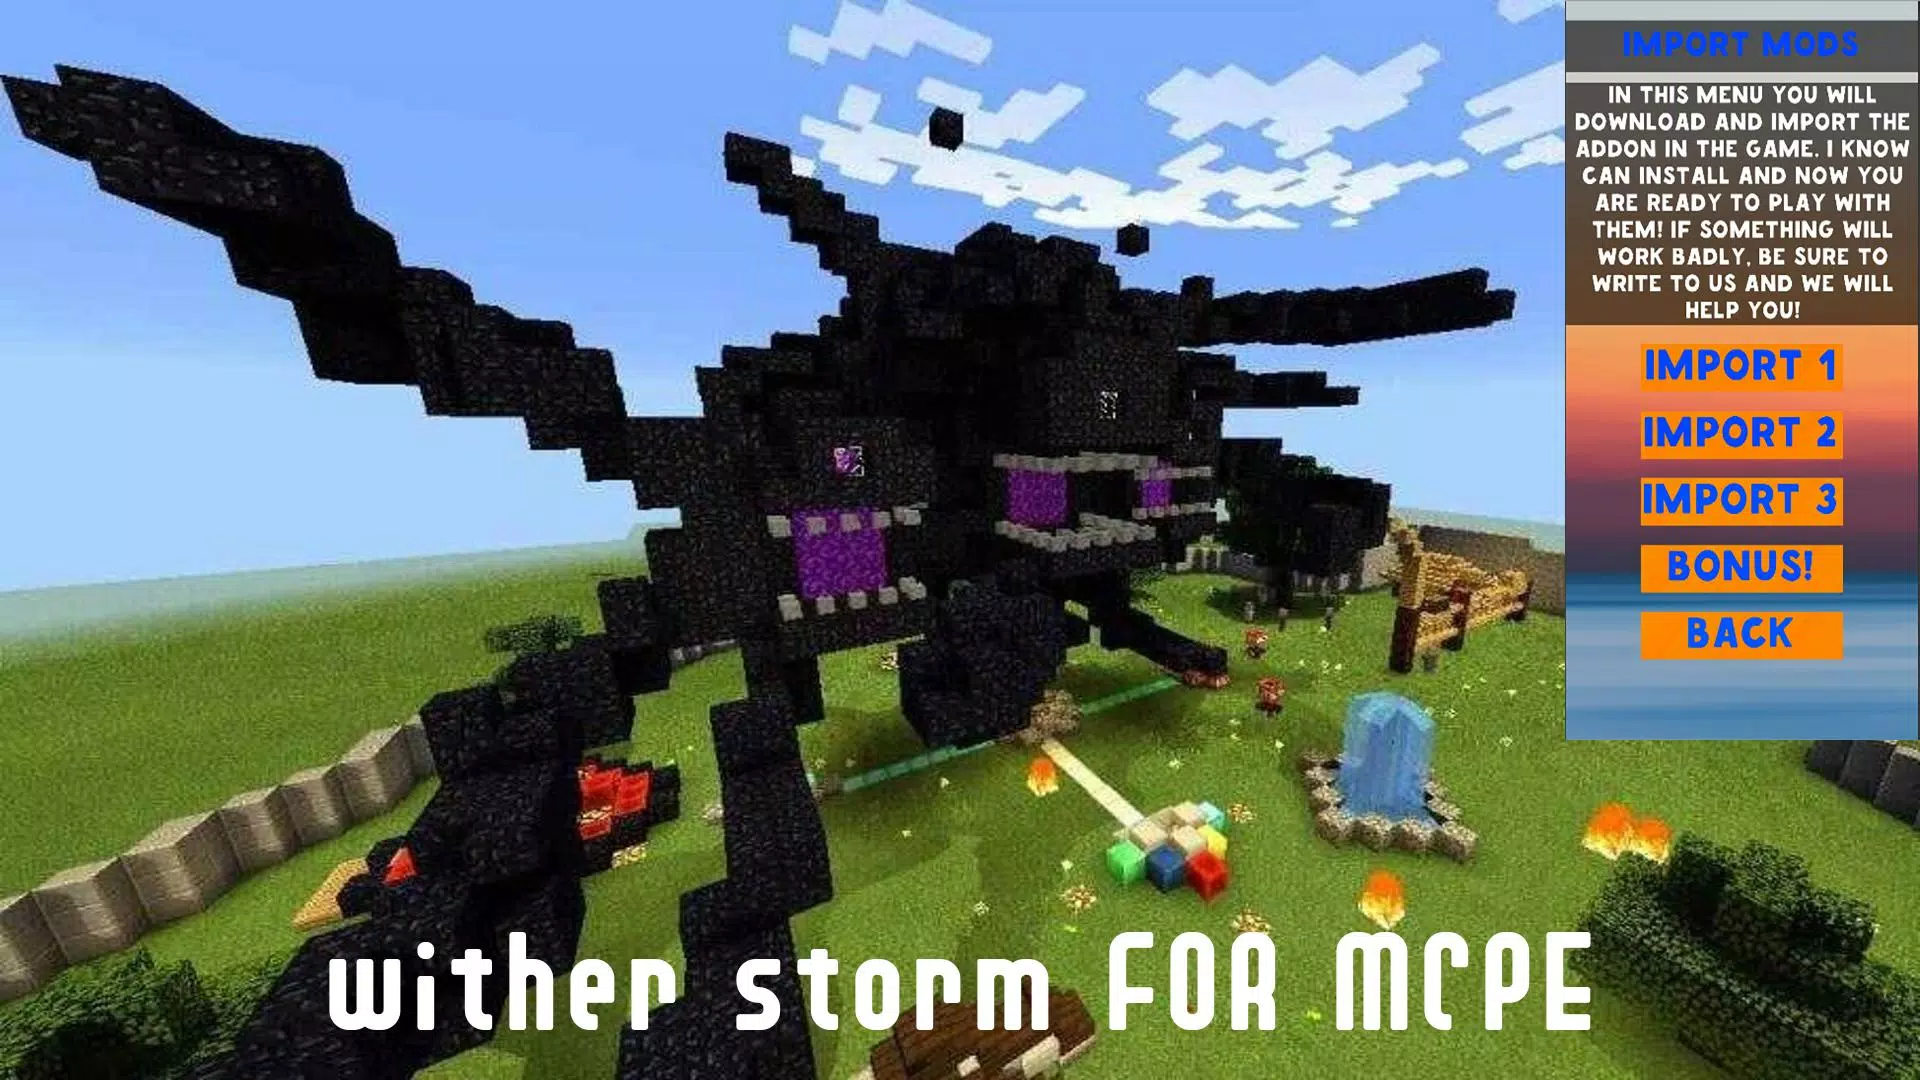 Wither Storm Addon - MCPE Addons for Bedrock & Pocket Edition